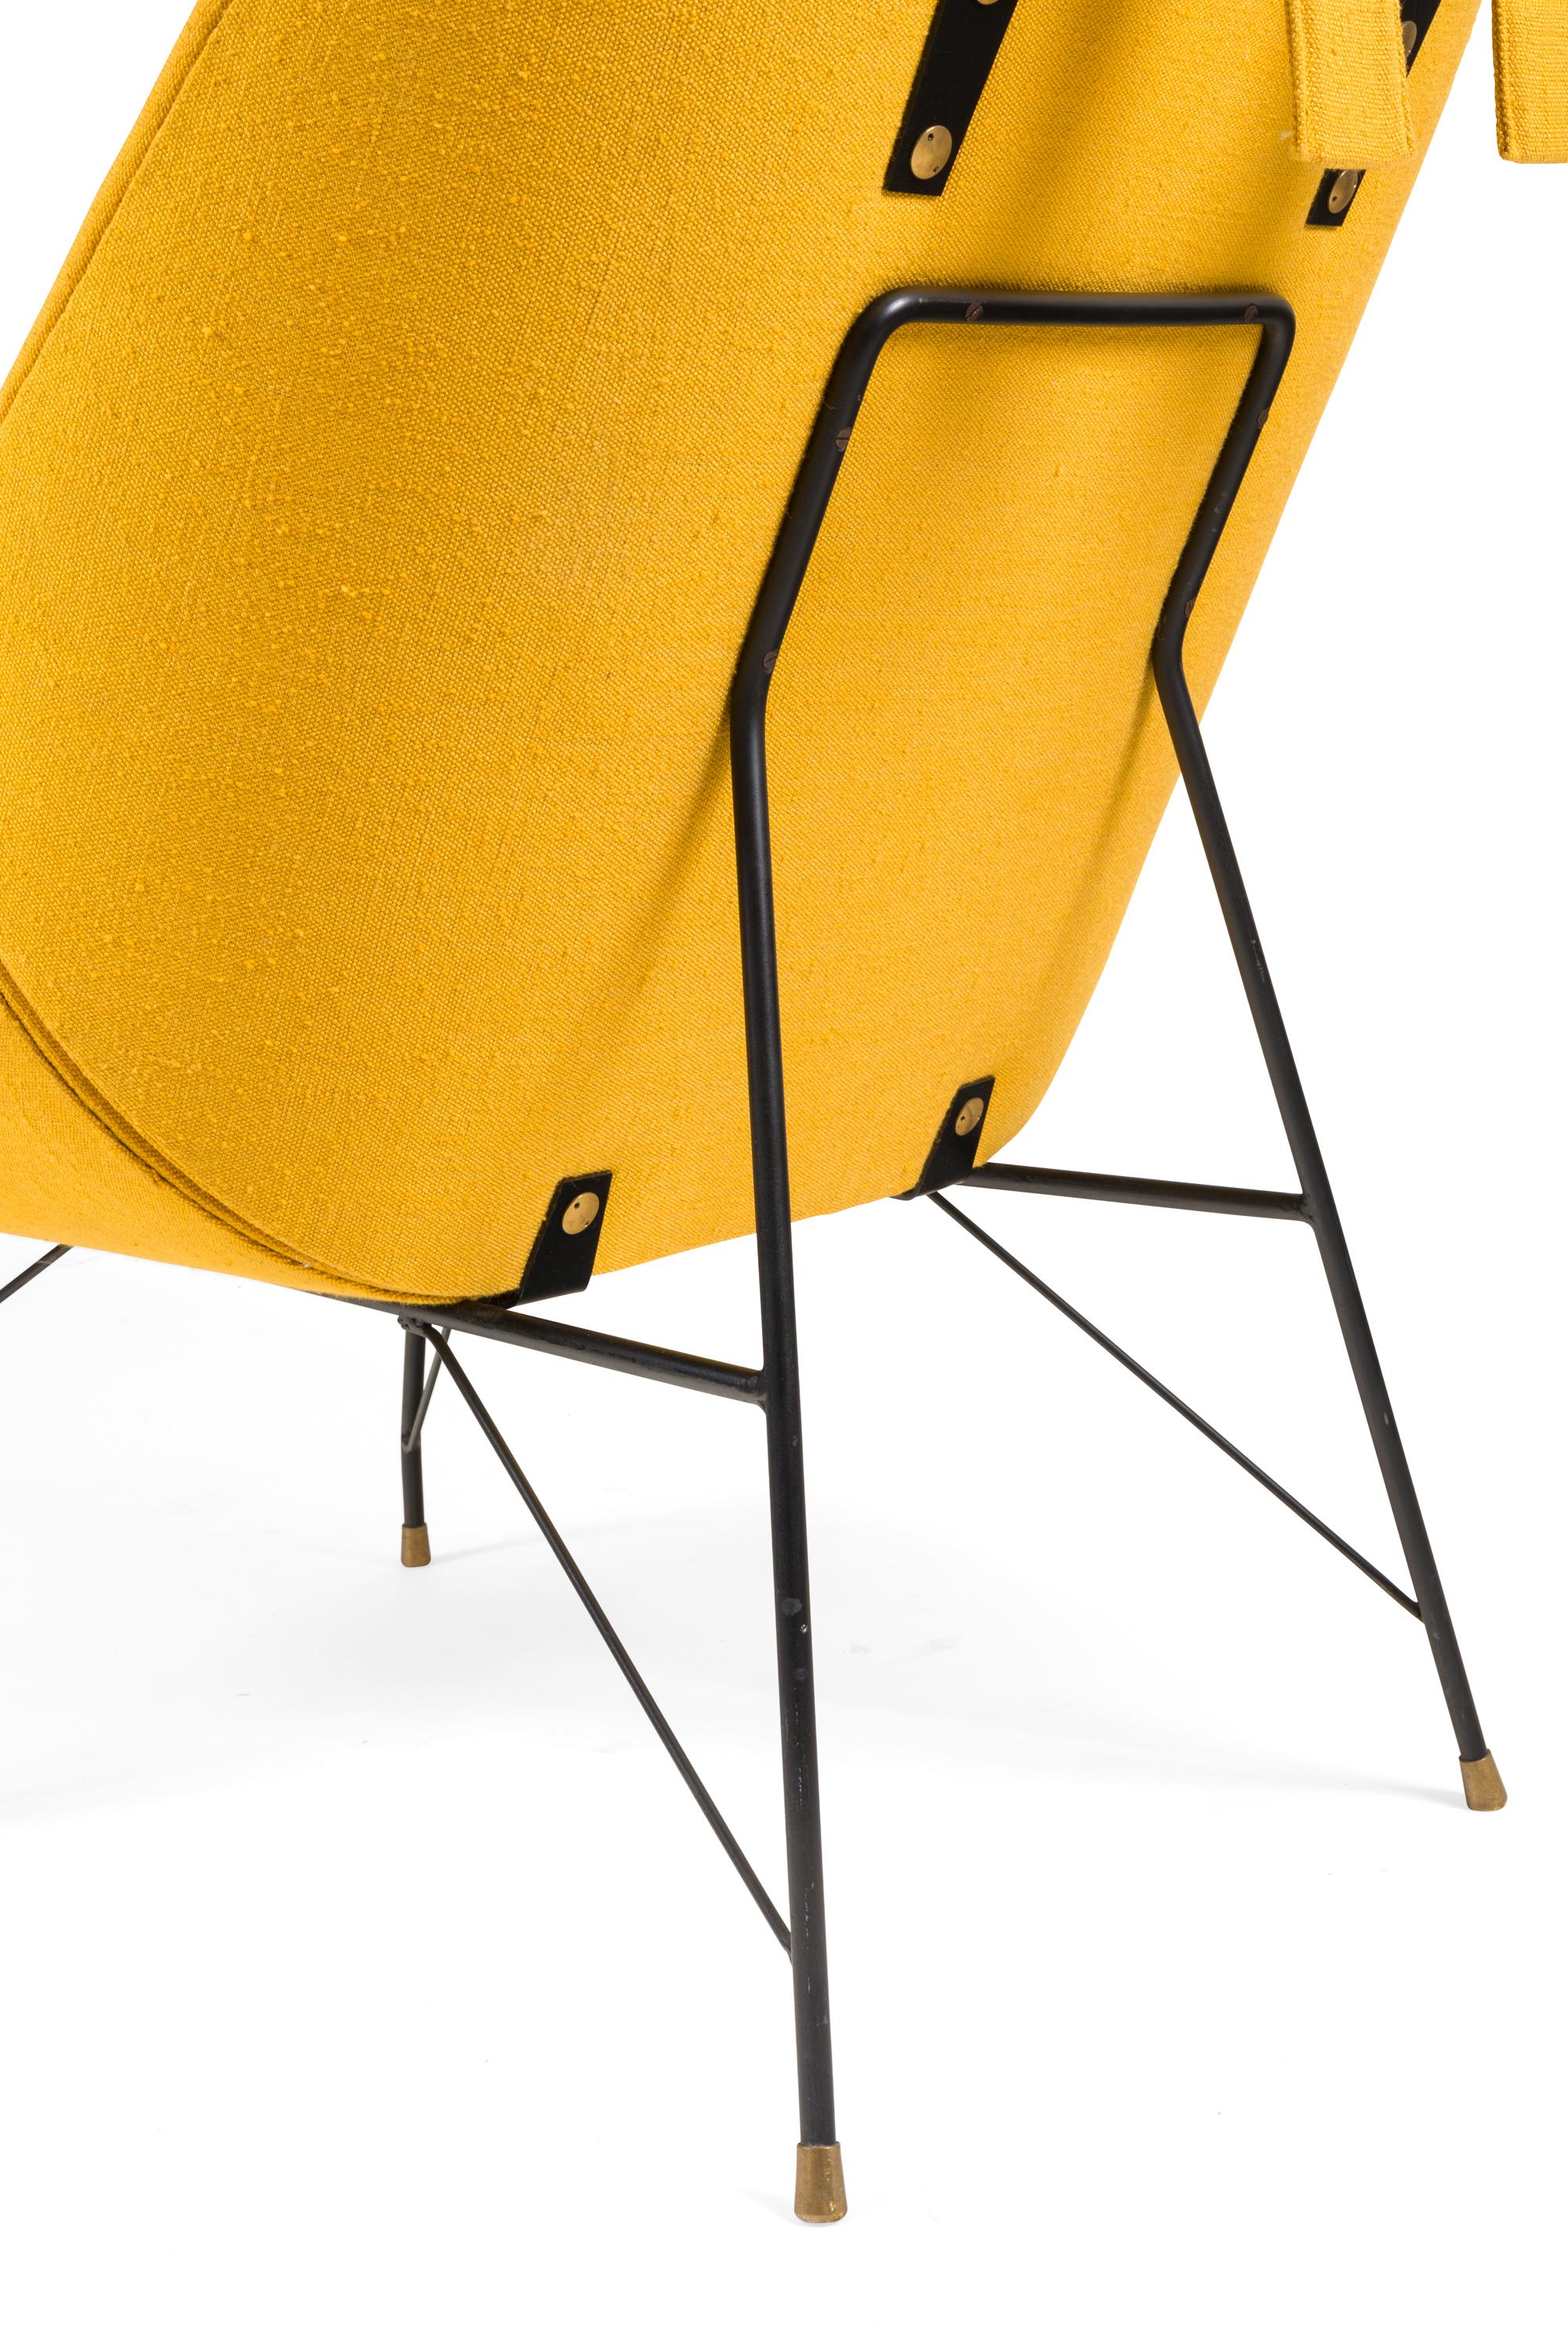 Fabric High Back Yellow Lounge Chairs by Augusto Bozzi for Saporiti, Italy 1950s